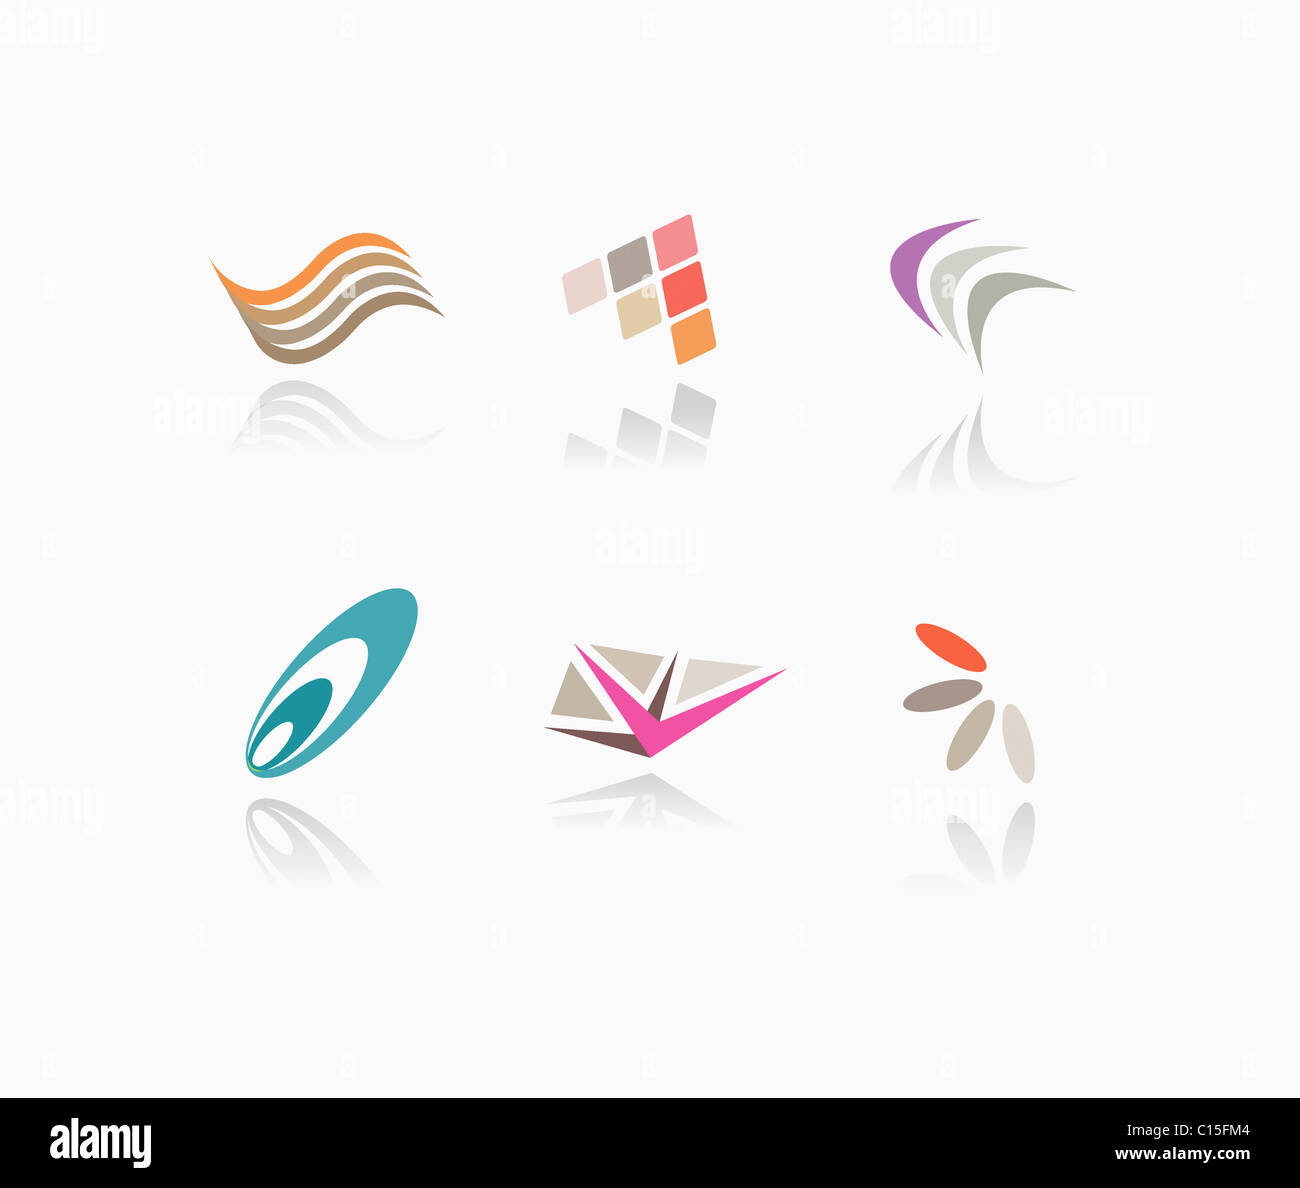 abstract symbol icons Stock Photo